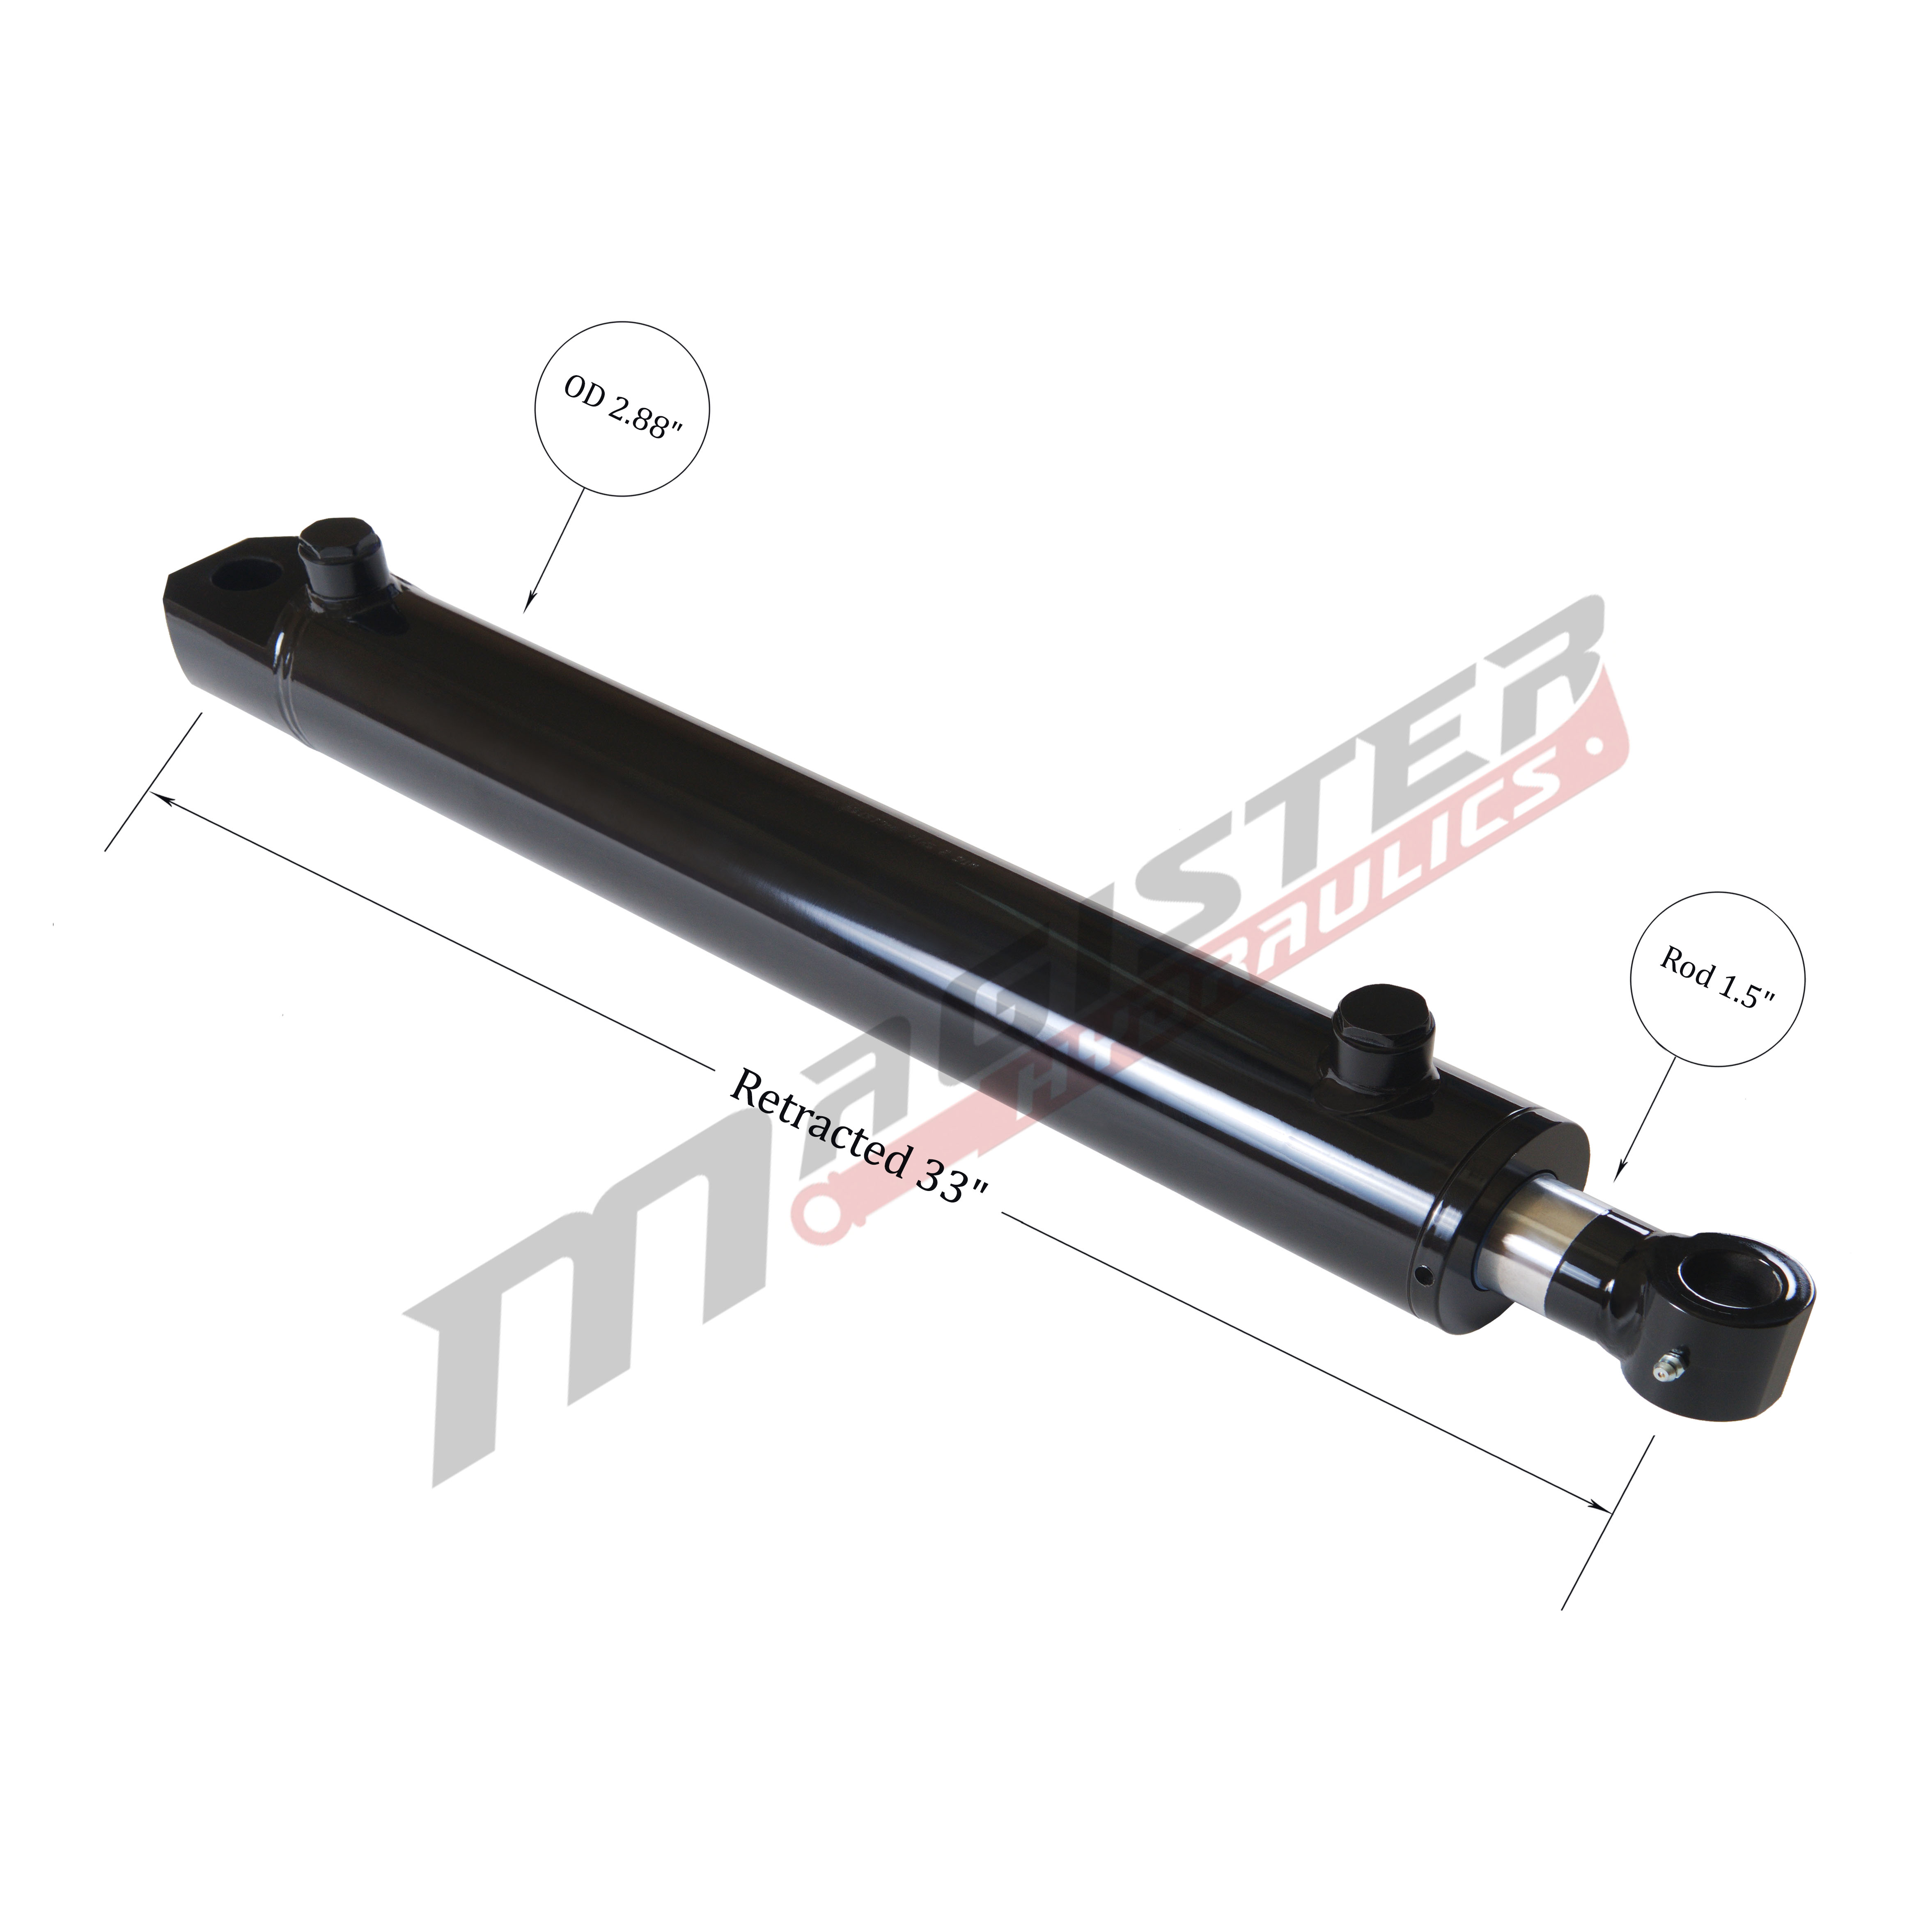 2.5 bore x 24 stroke hydraulic cylinder, welded tang double acting cylinder | Magister Hydraulics